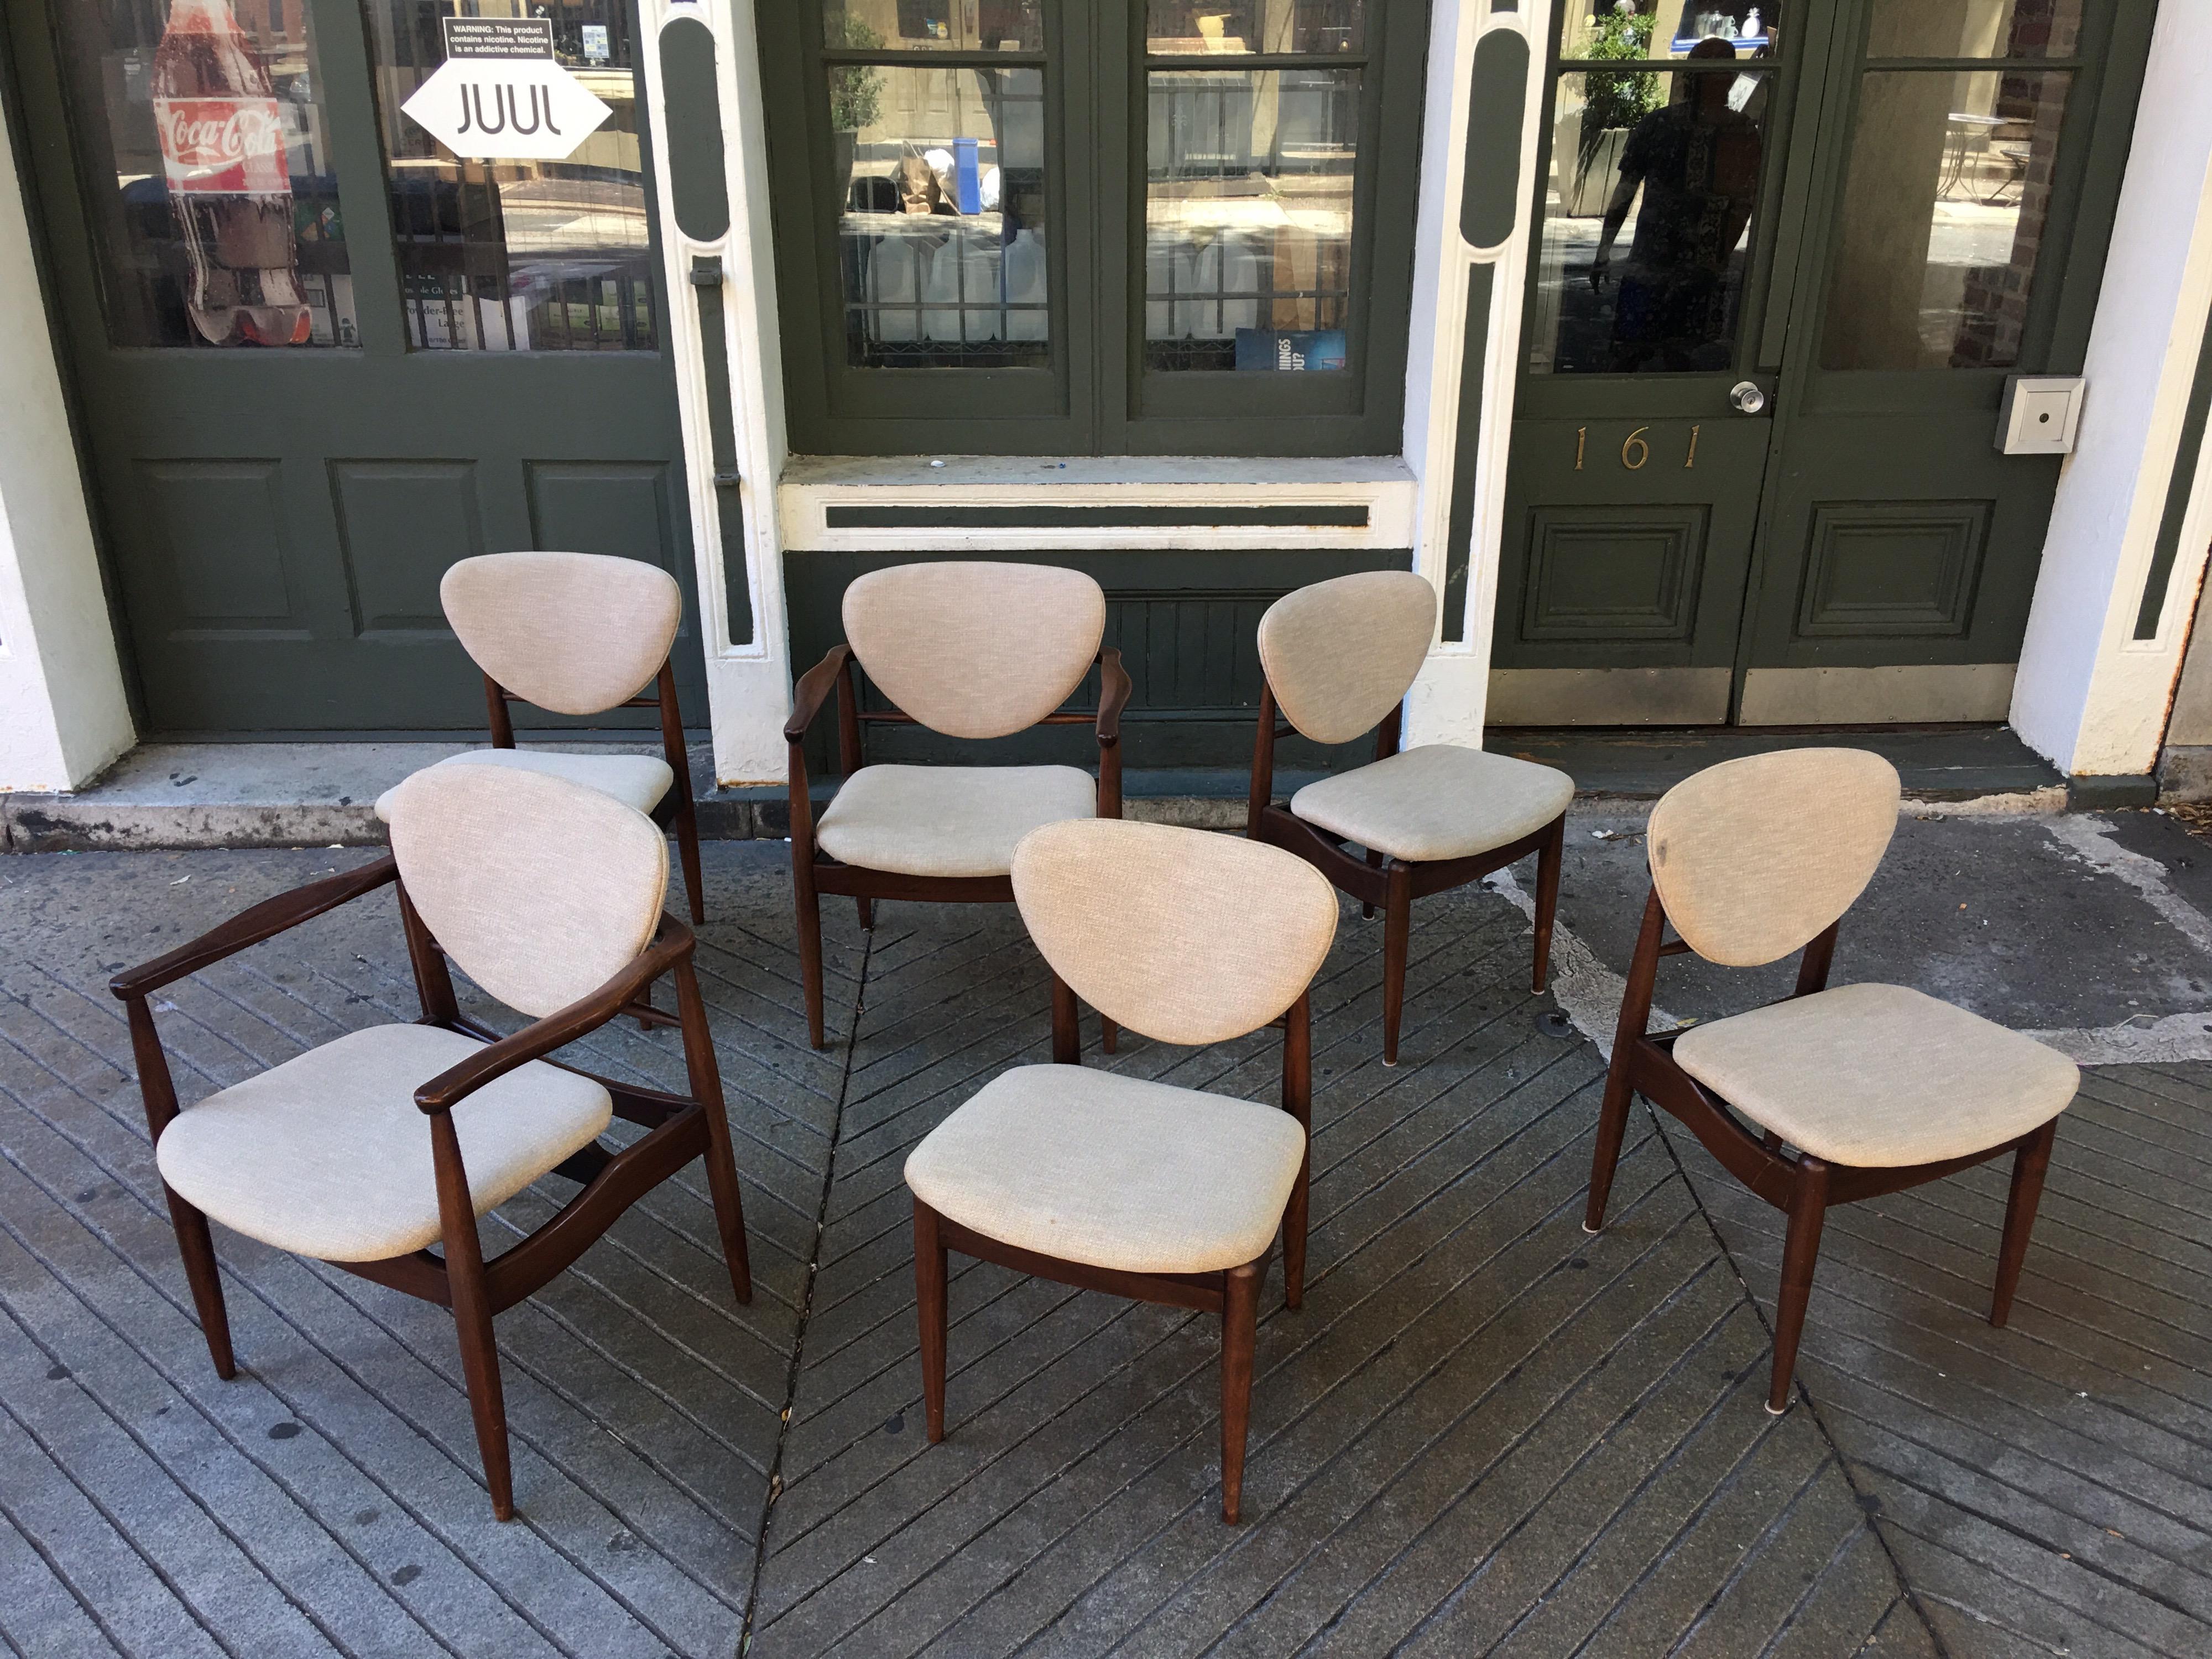 Solid Walnut John Stuart dining chairs in the style of Finn Juhl, 1960s chairs influenced by Finn Juhl's Classic Designed chair. Very solid with a nice cream upholstery. 2 armed, 4 armless armed chairs measure 24.5 wide. Measurements below are for